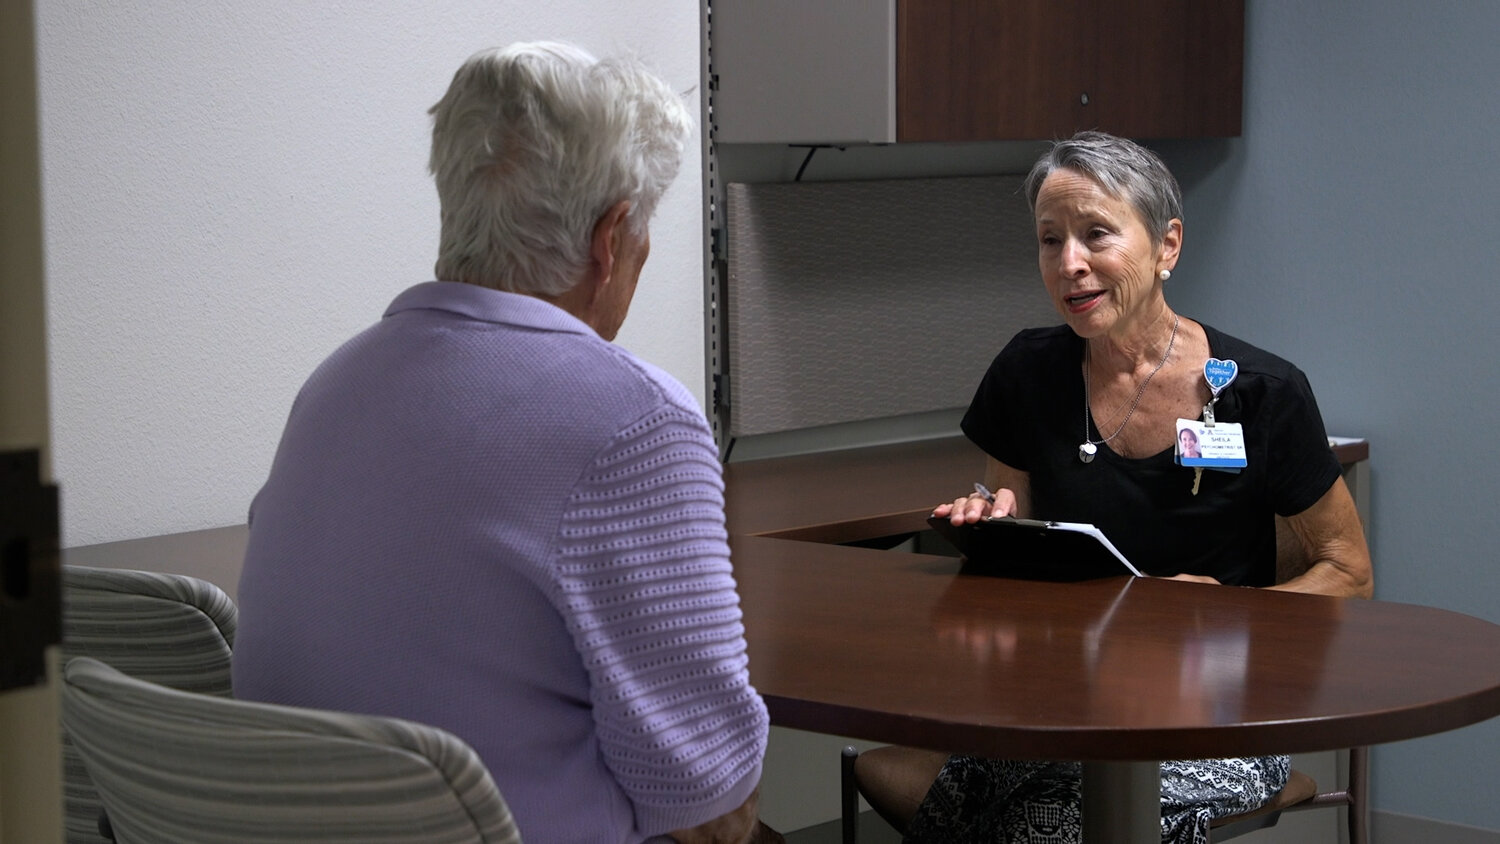 Sheila Vadovicky of Banner Alzheimer’s Institute, at right, discusses the topic of dementia with a Valley resident. (Photo submitted by Banner Research)